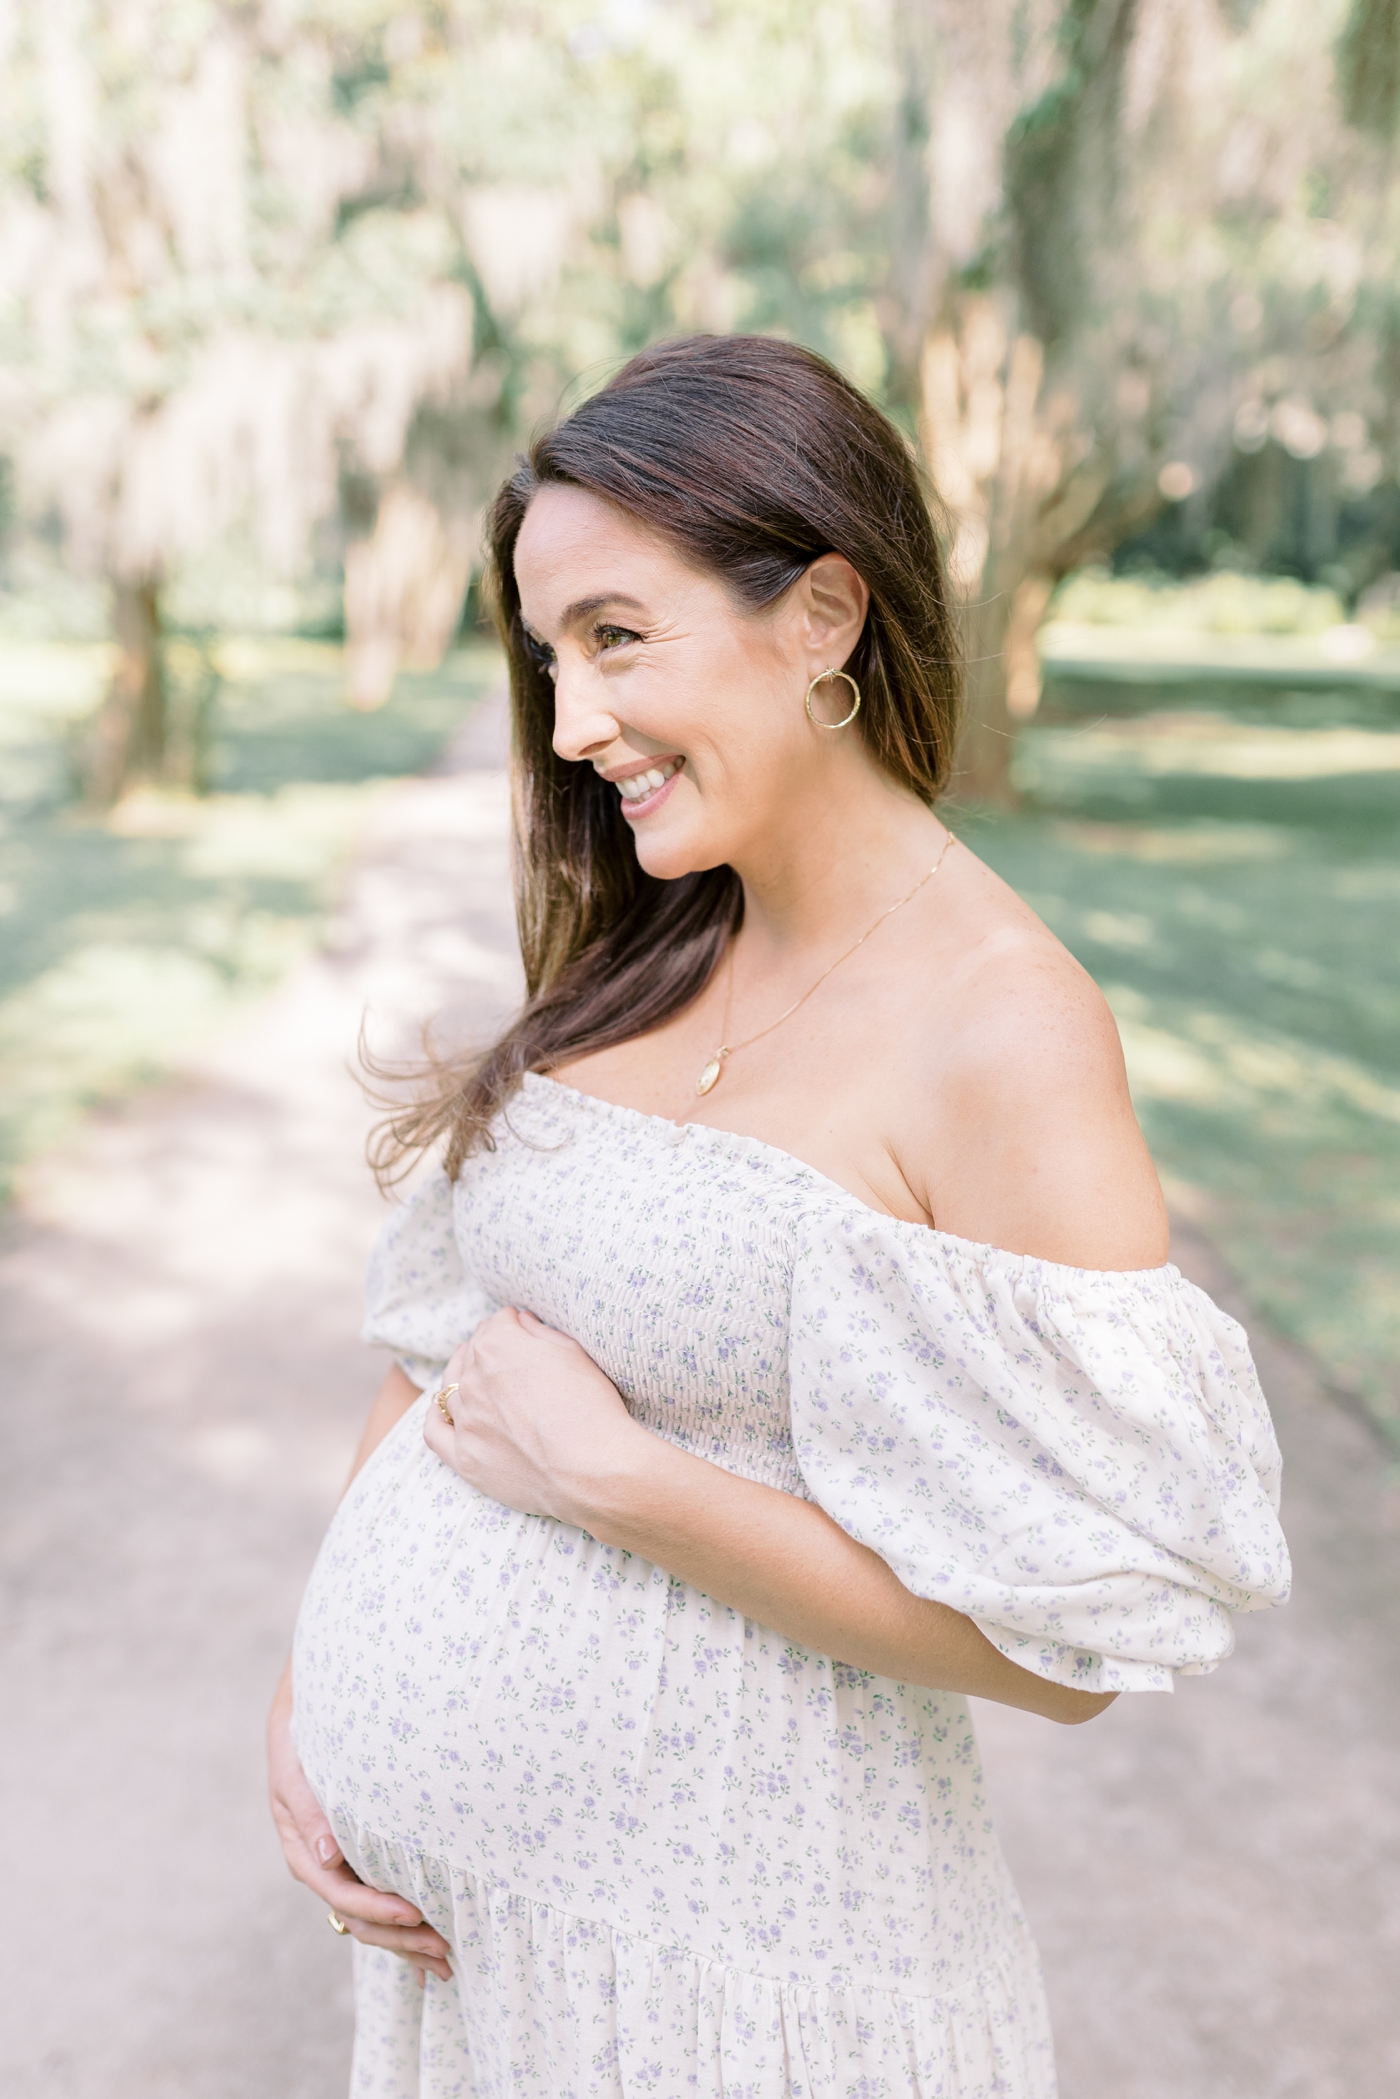 Mom to be smiling holding her belly | Photo by Caitlyn Motycka Photography.